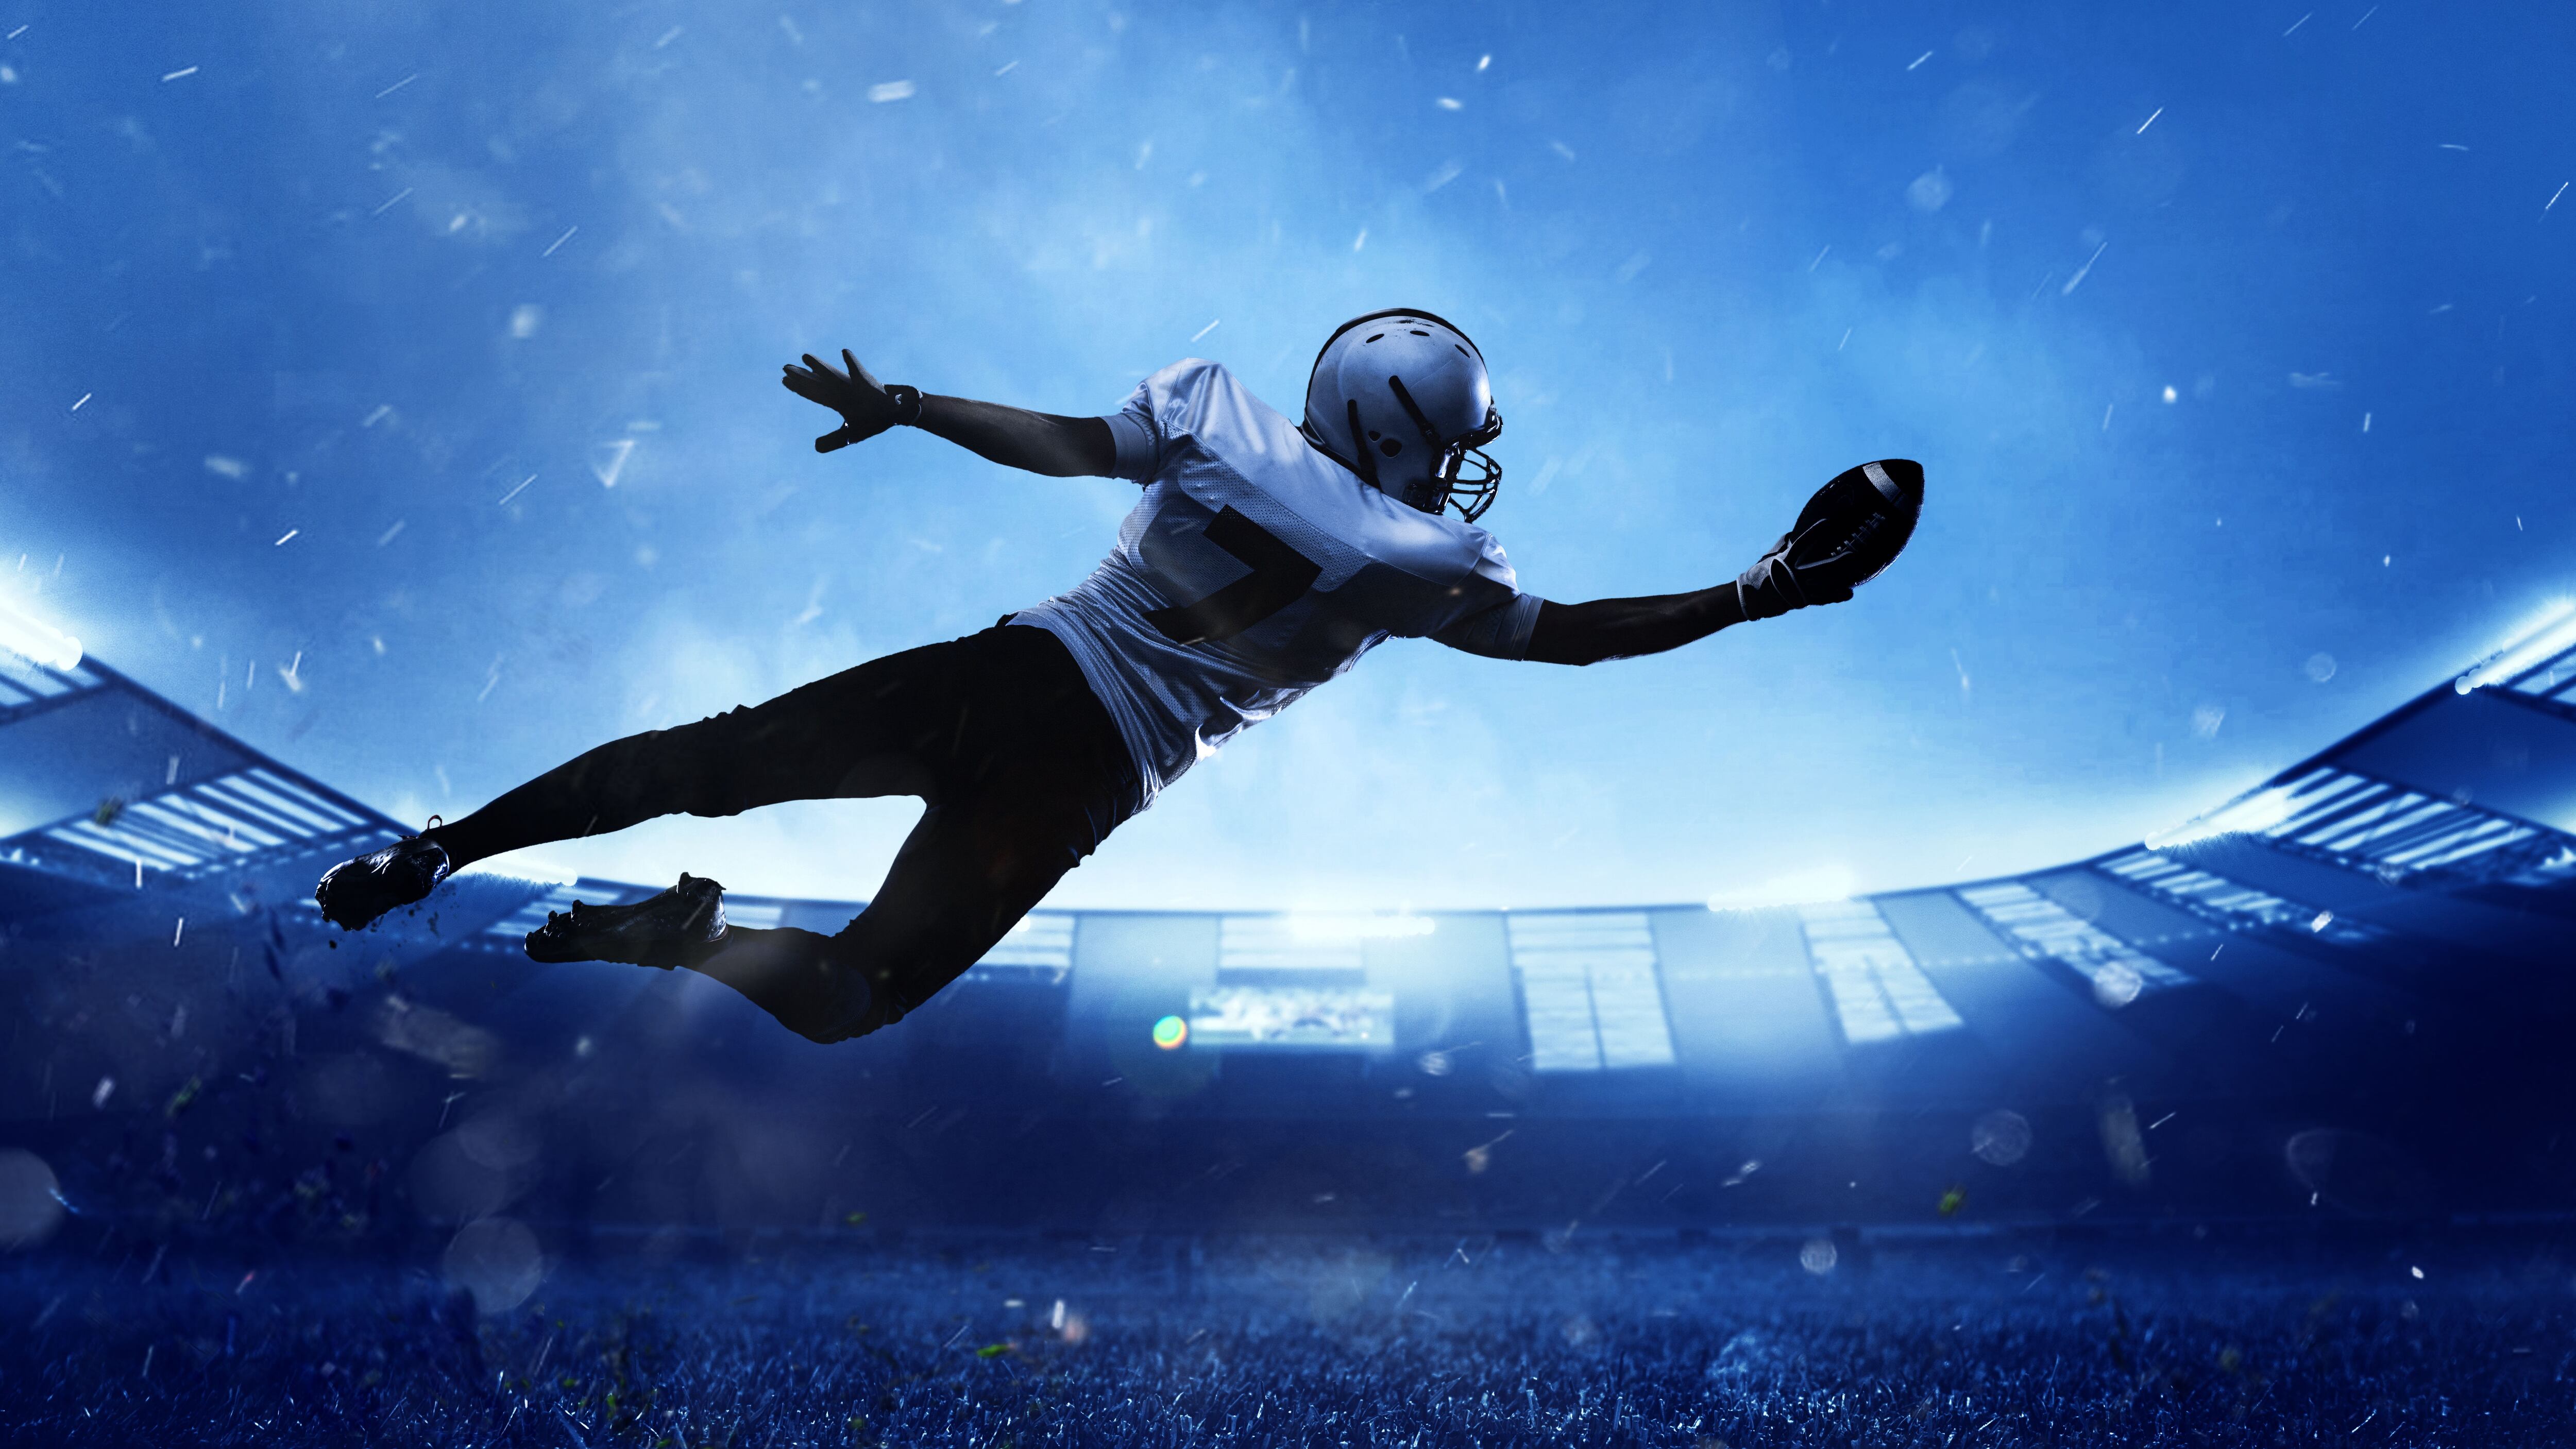 FanDuel promo code grants you $3,000 welcome offer to bet on Super